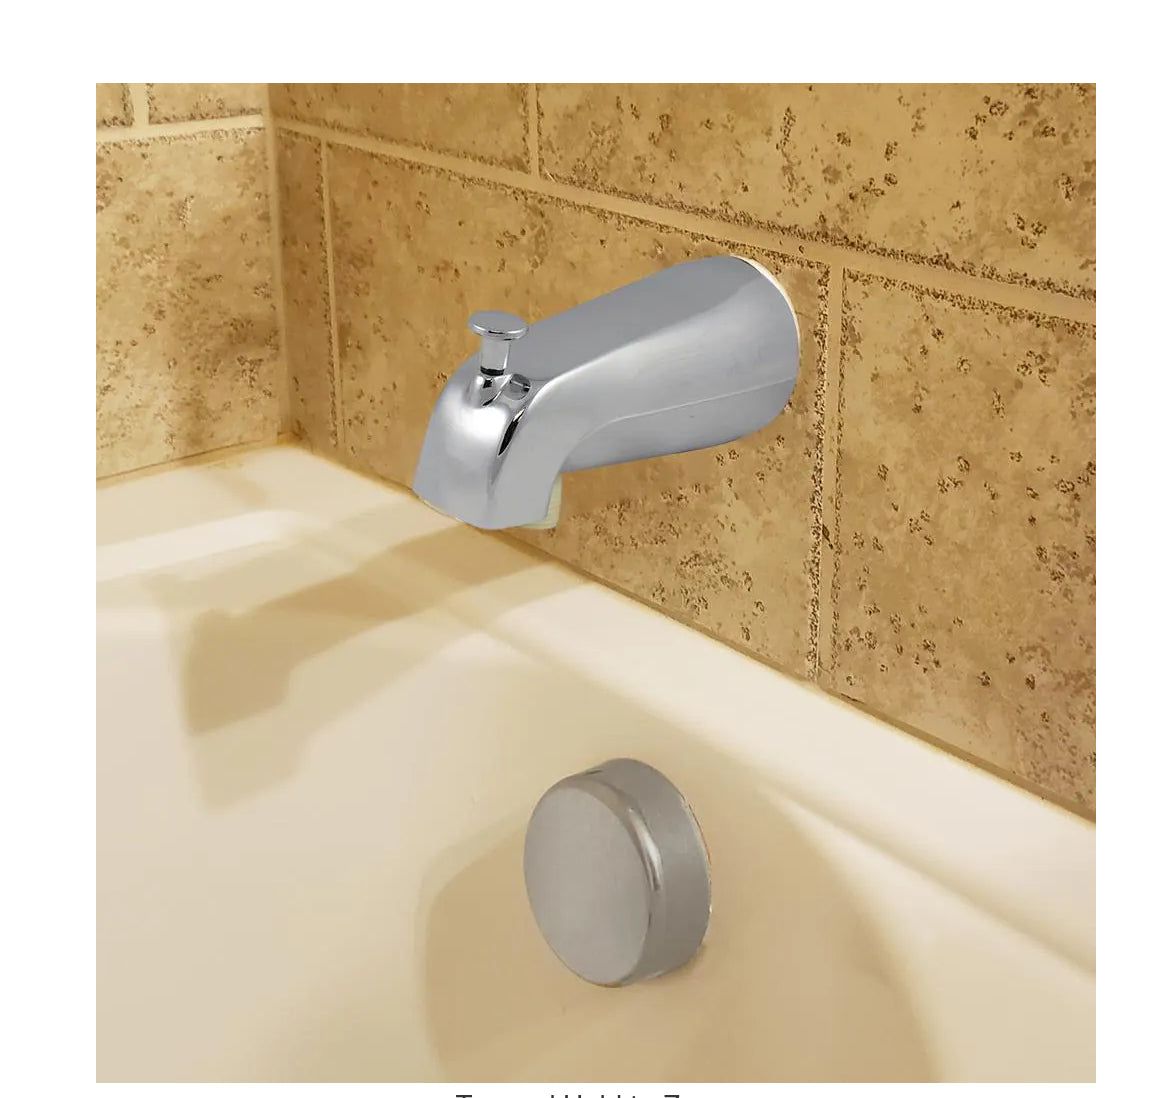 Danco 3 in. Universal Tub Spout with Handheld Shower Fitting Damaged Box